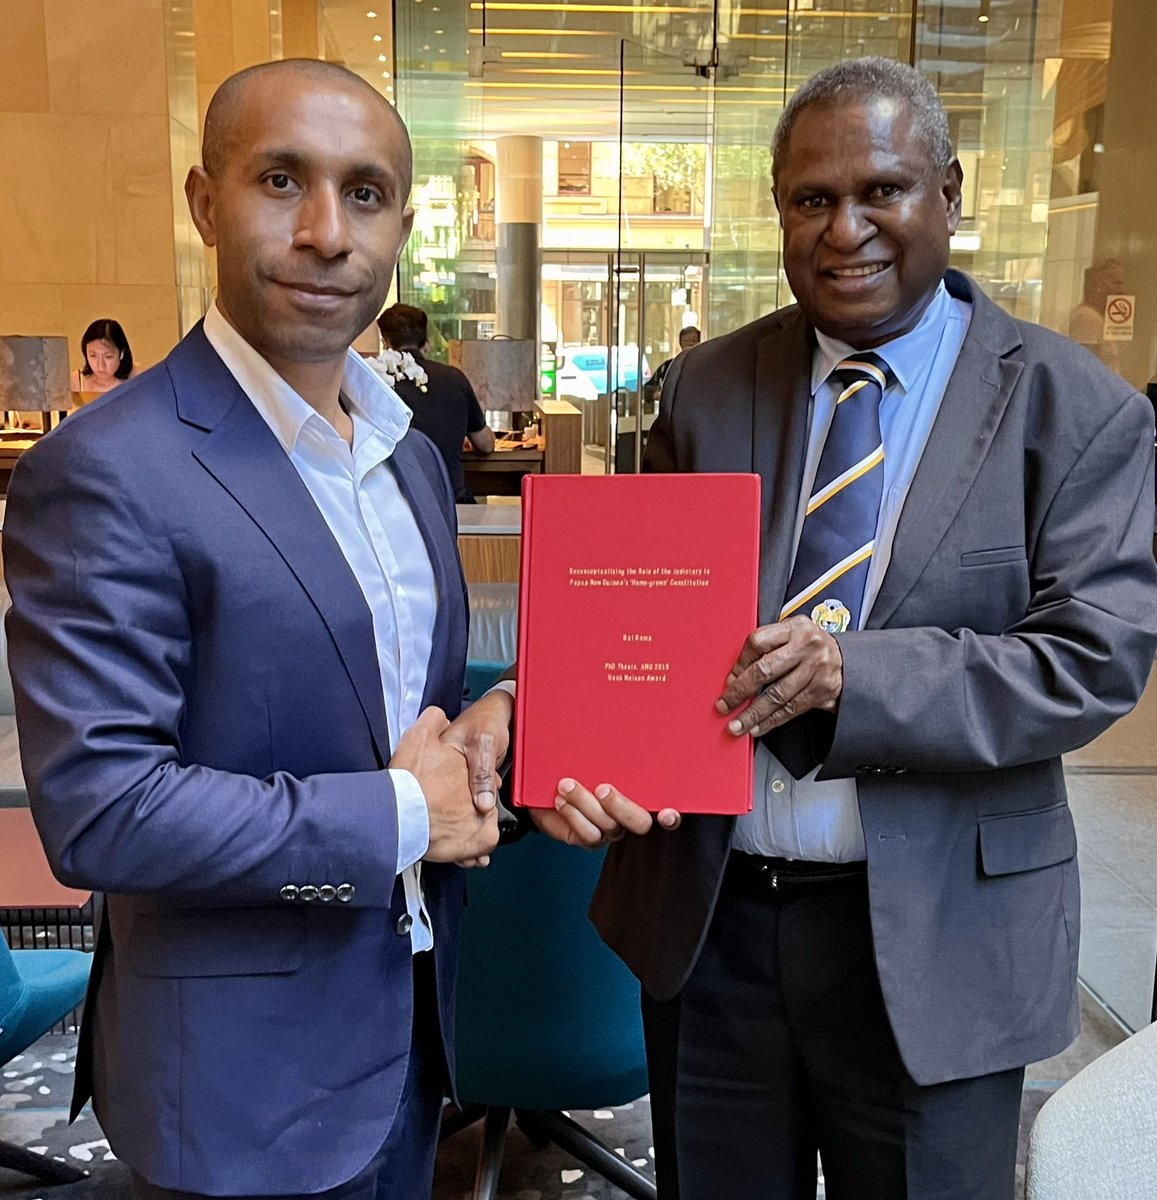 A great honour to present a copy of my award-winning law PhD thesis to the Chief Justice of PNG, Sir G.Salika! It’s the 1st major academic work on the PNG judiciary. His interest to read & avail for fellow judges is immensely appreciated. I pray the thesis inspires their work.